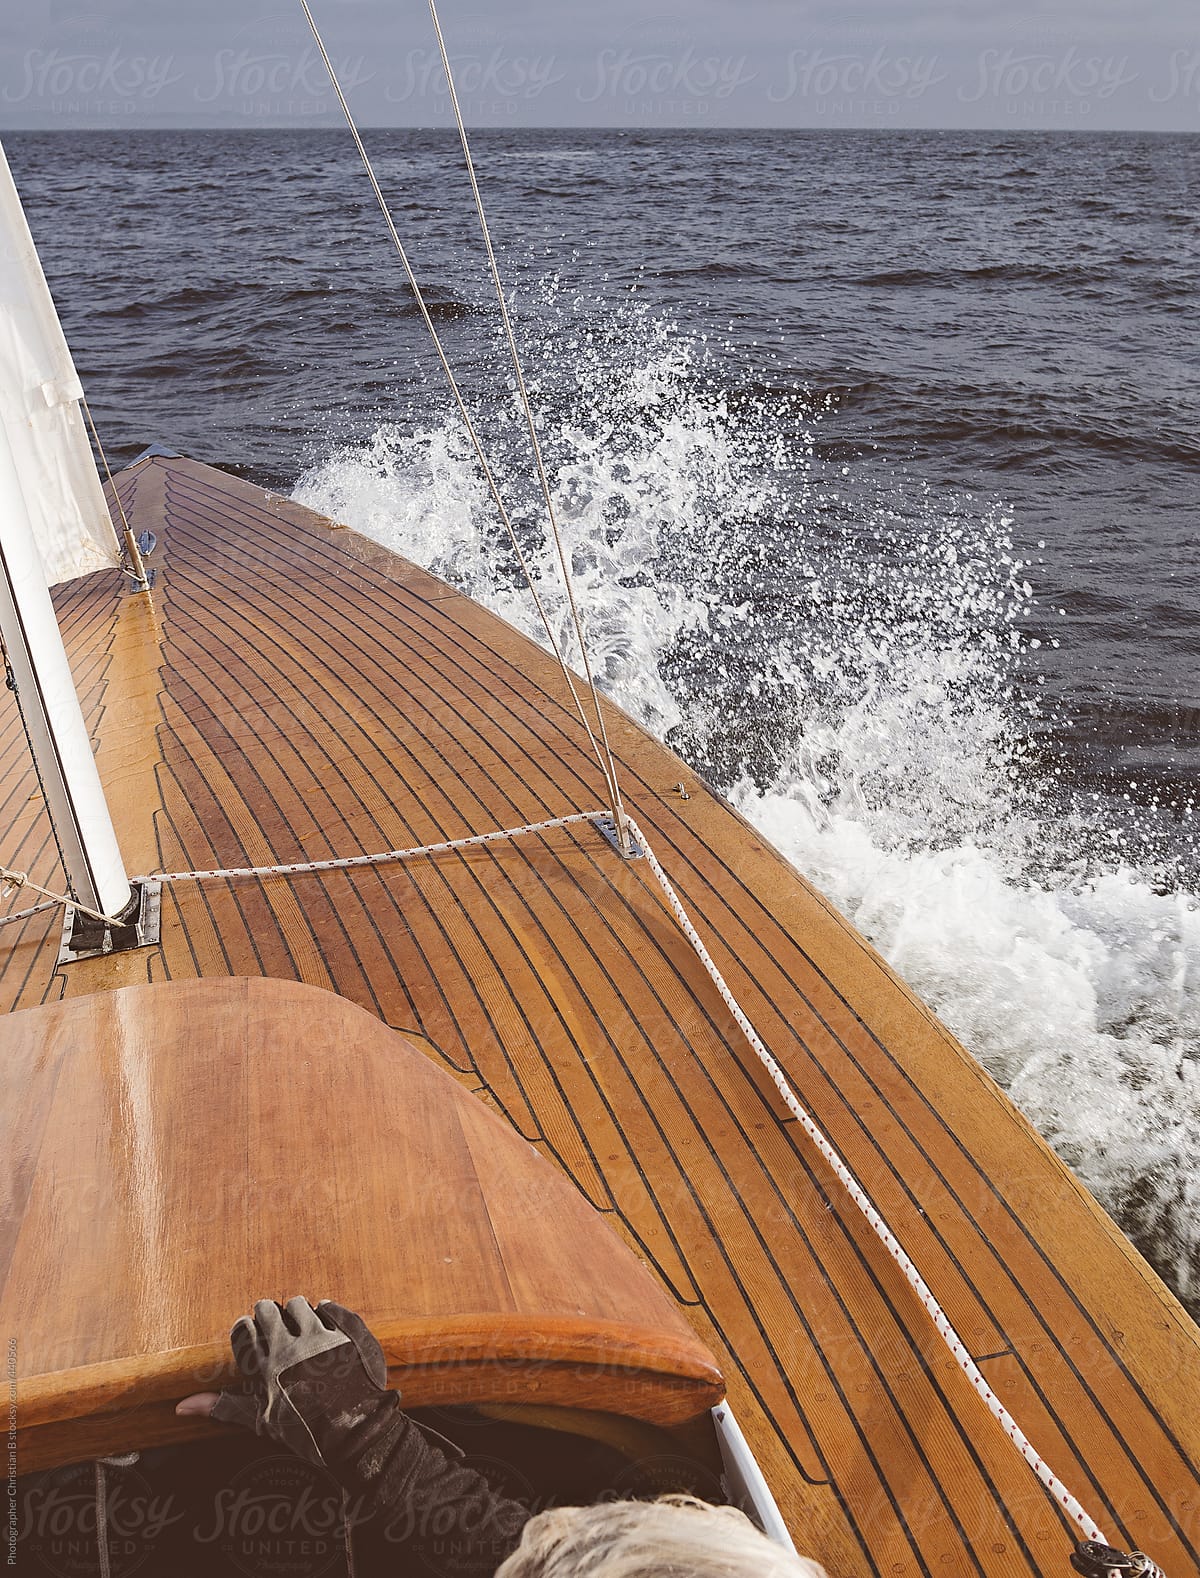 Waves breaking on the bow of wooden boat